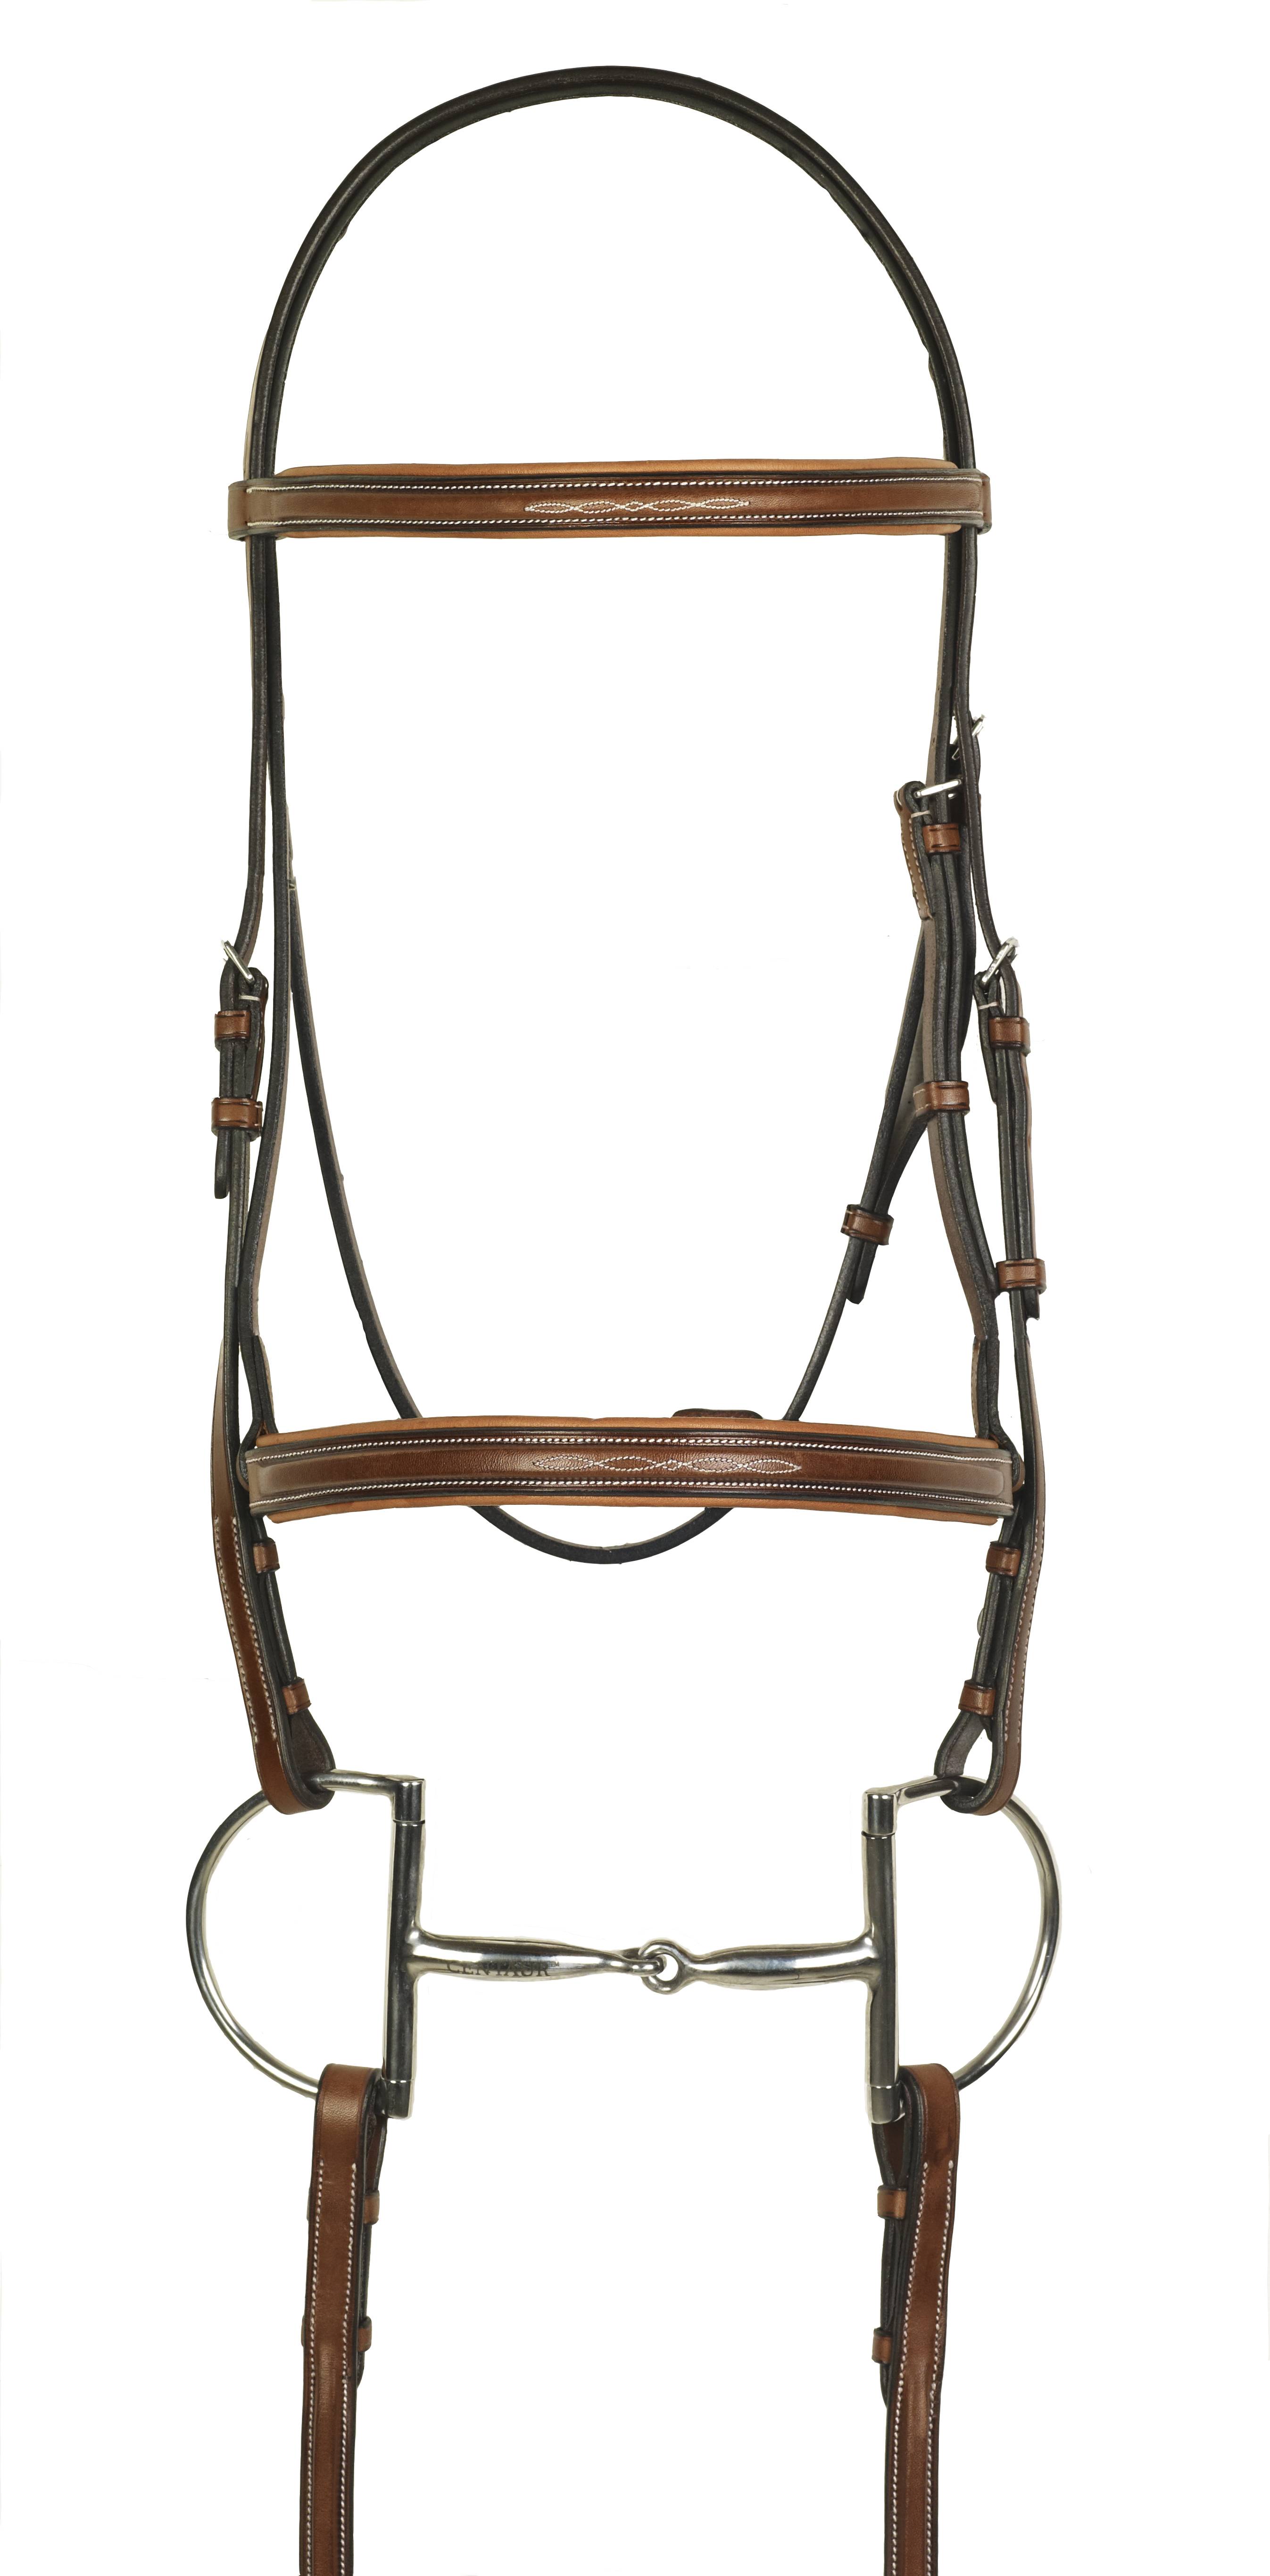 HK Americana Square Fancy Raised Padded Bridle with Square Fancy Raised Lace Reins